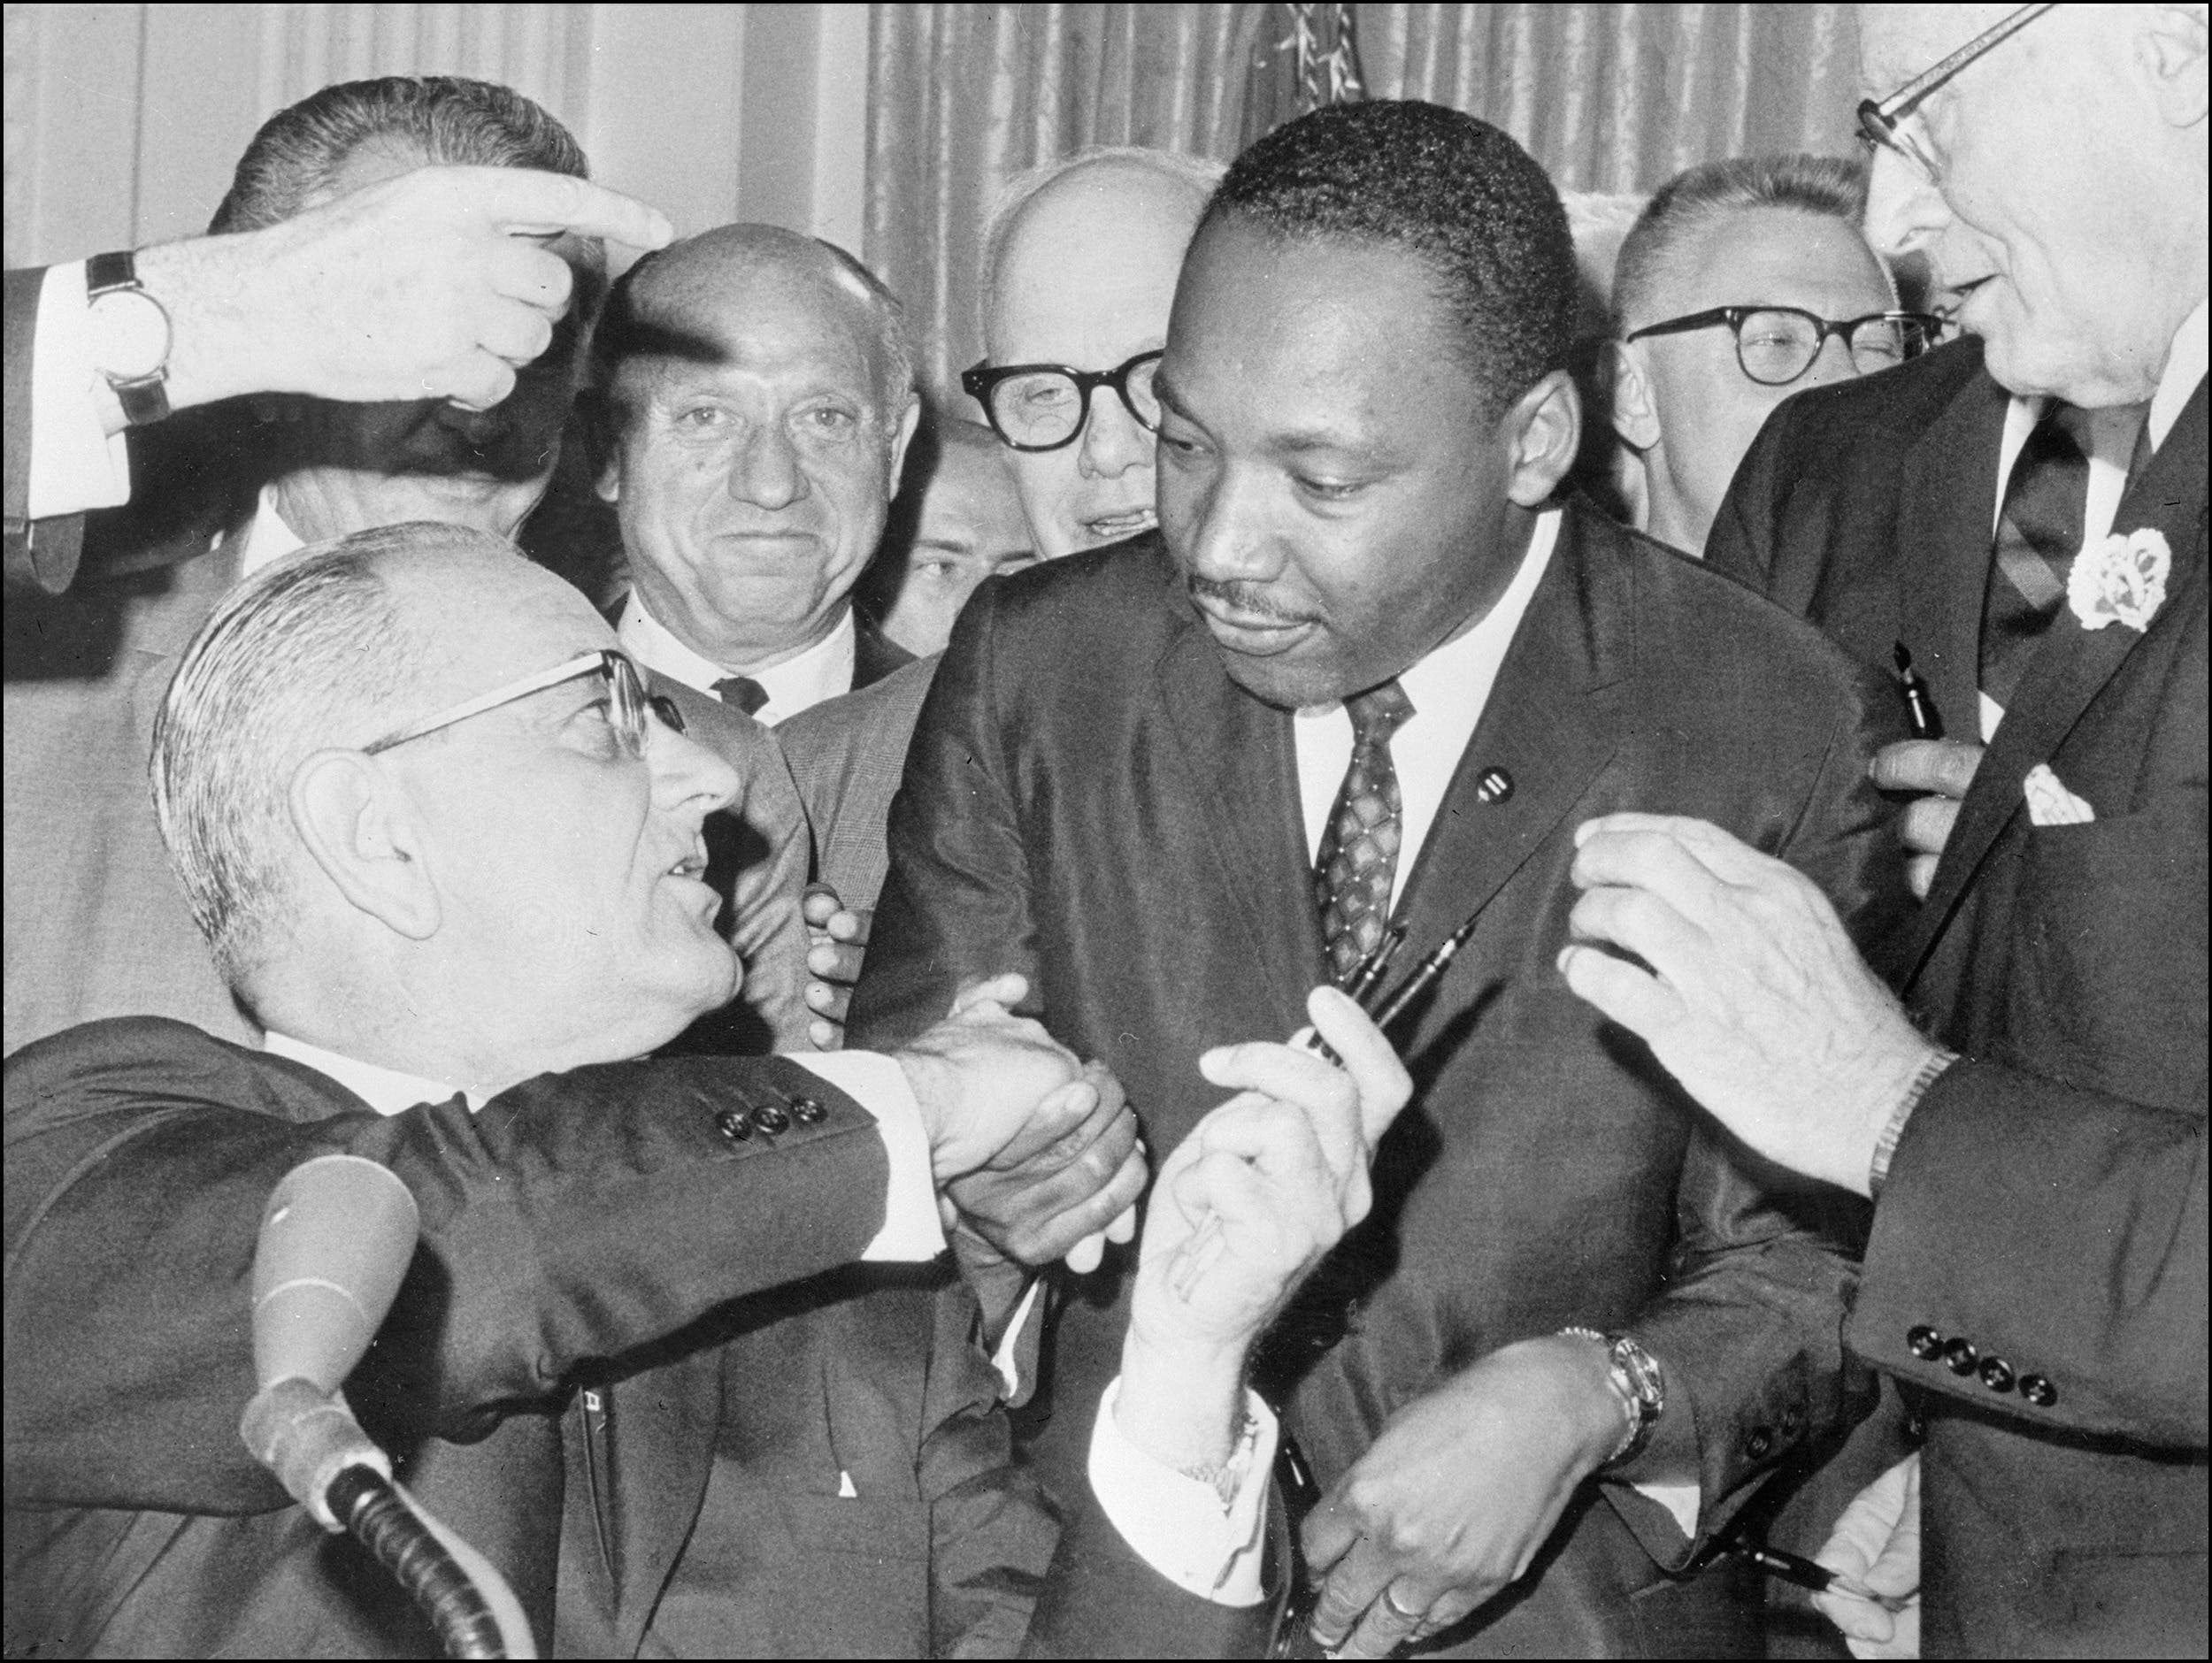 Martin Luther King Jr. shakes hands with President Lyndon B. Johnson at the signing of the 1964 Civil Rights Act.